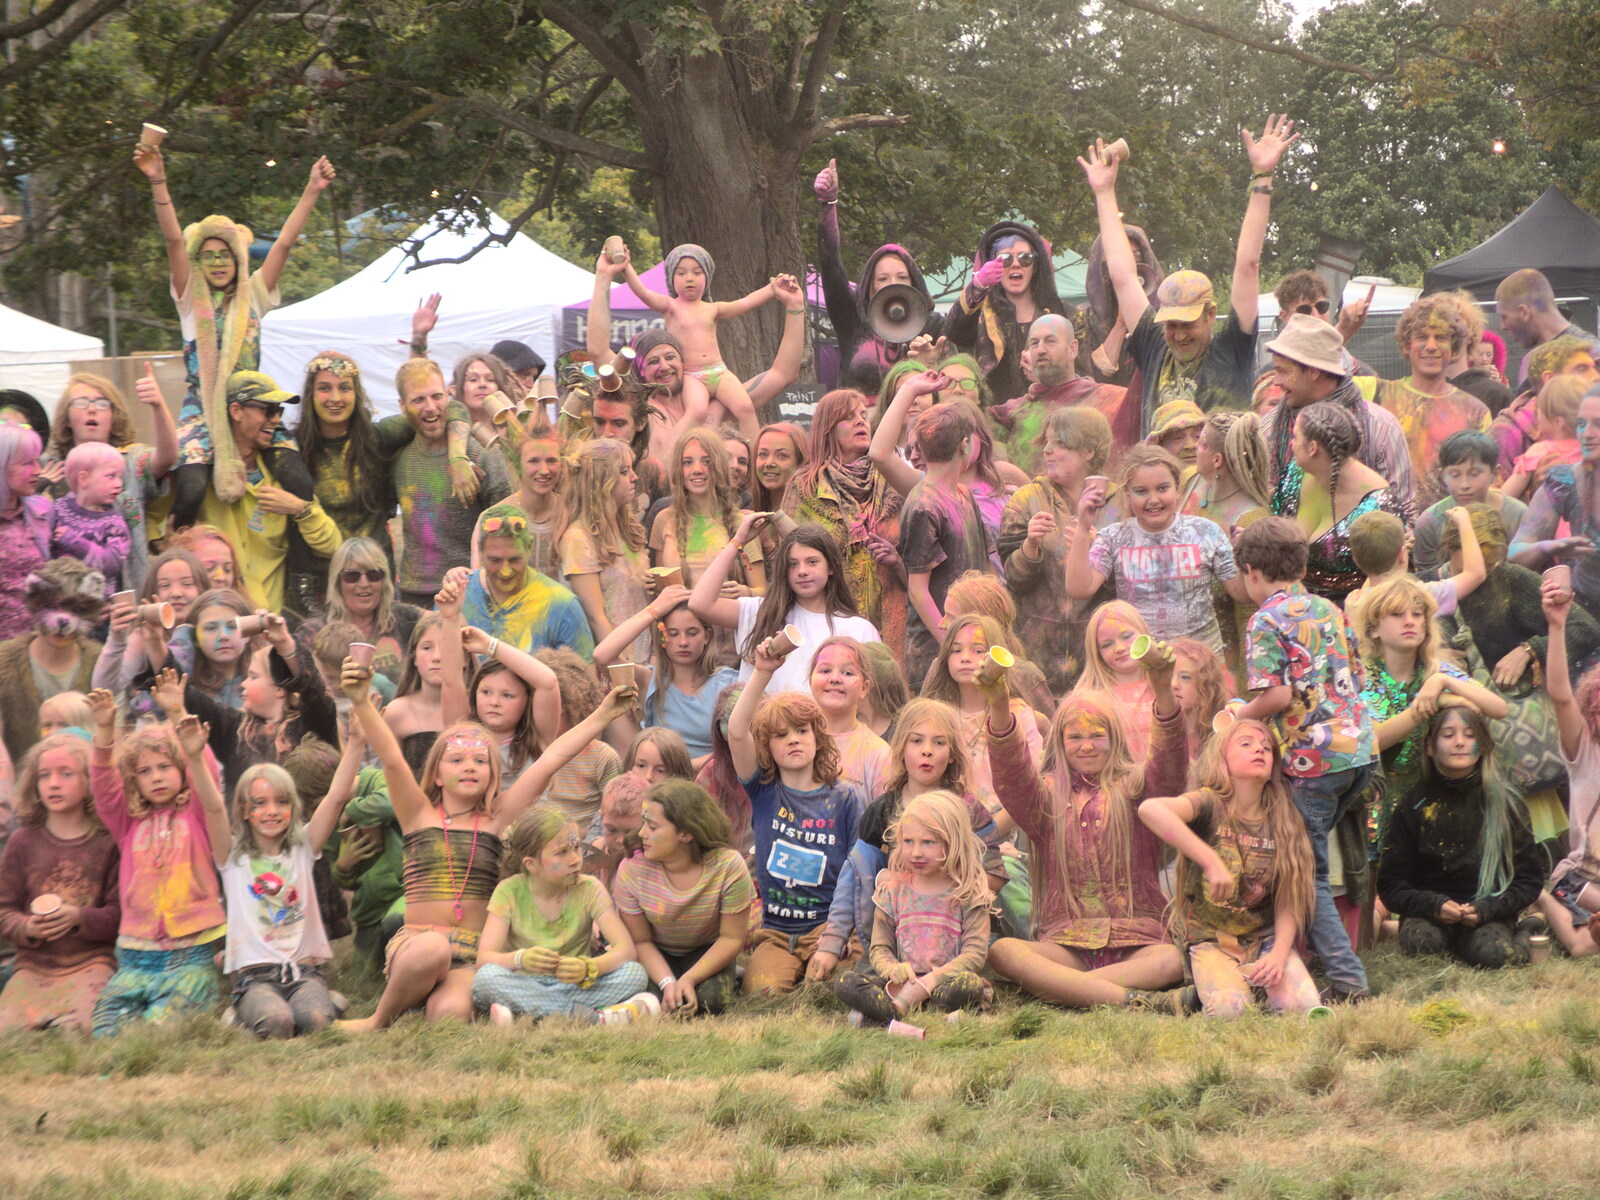 Another post-paint group photo from Maui Waui Festival, Hill Farm, Gressenhall, Norfolk - 28th August 2021